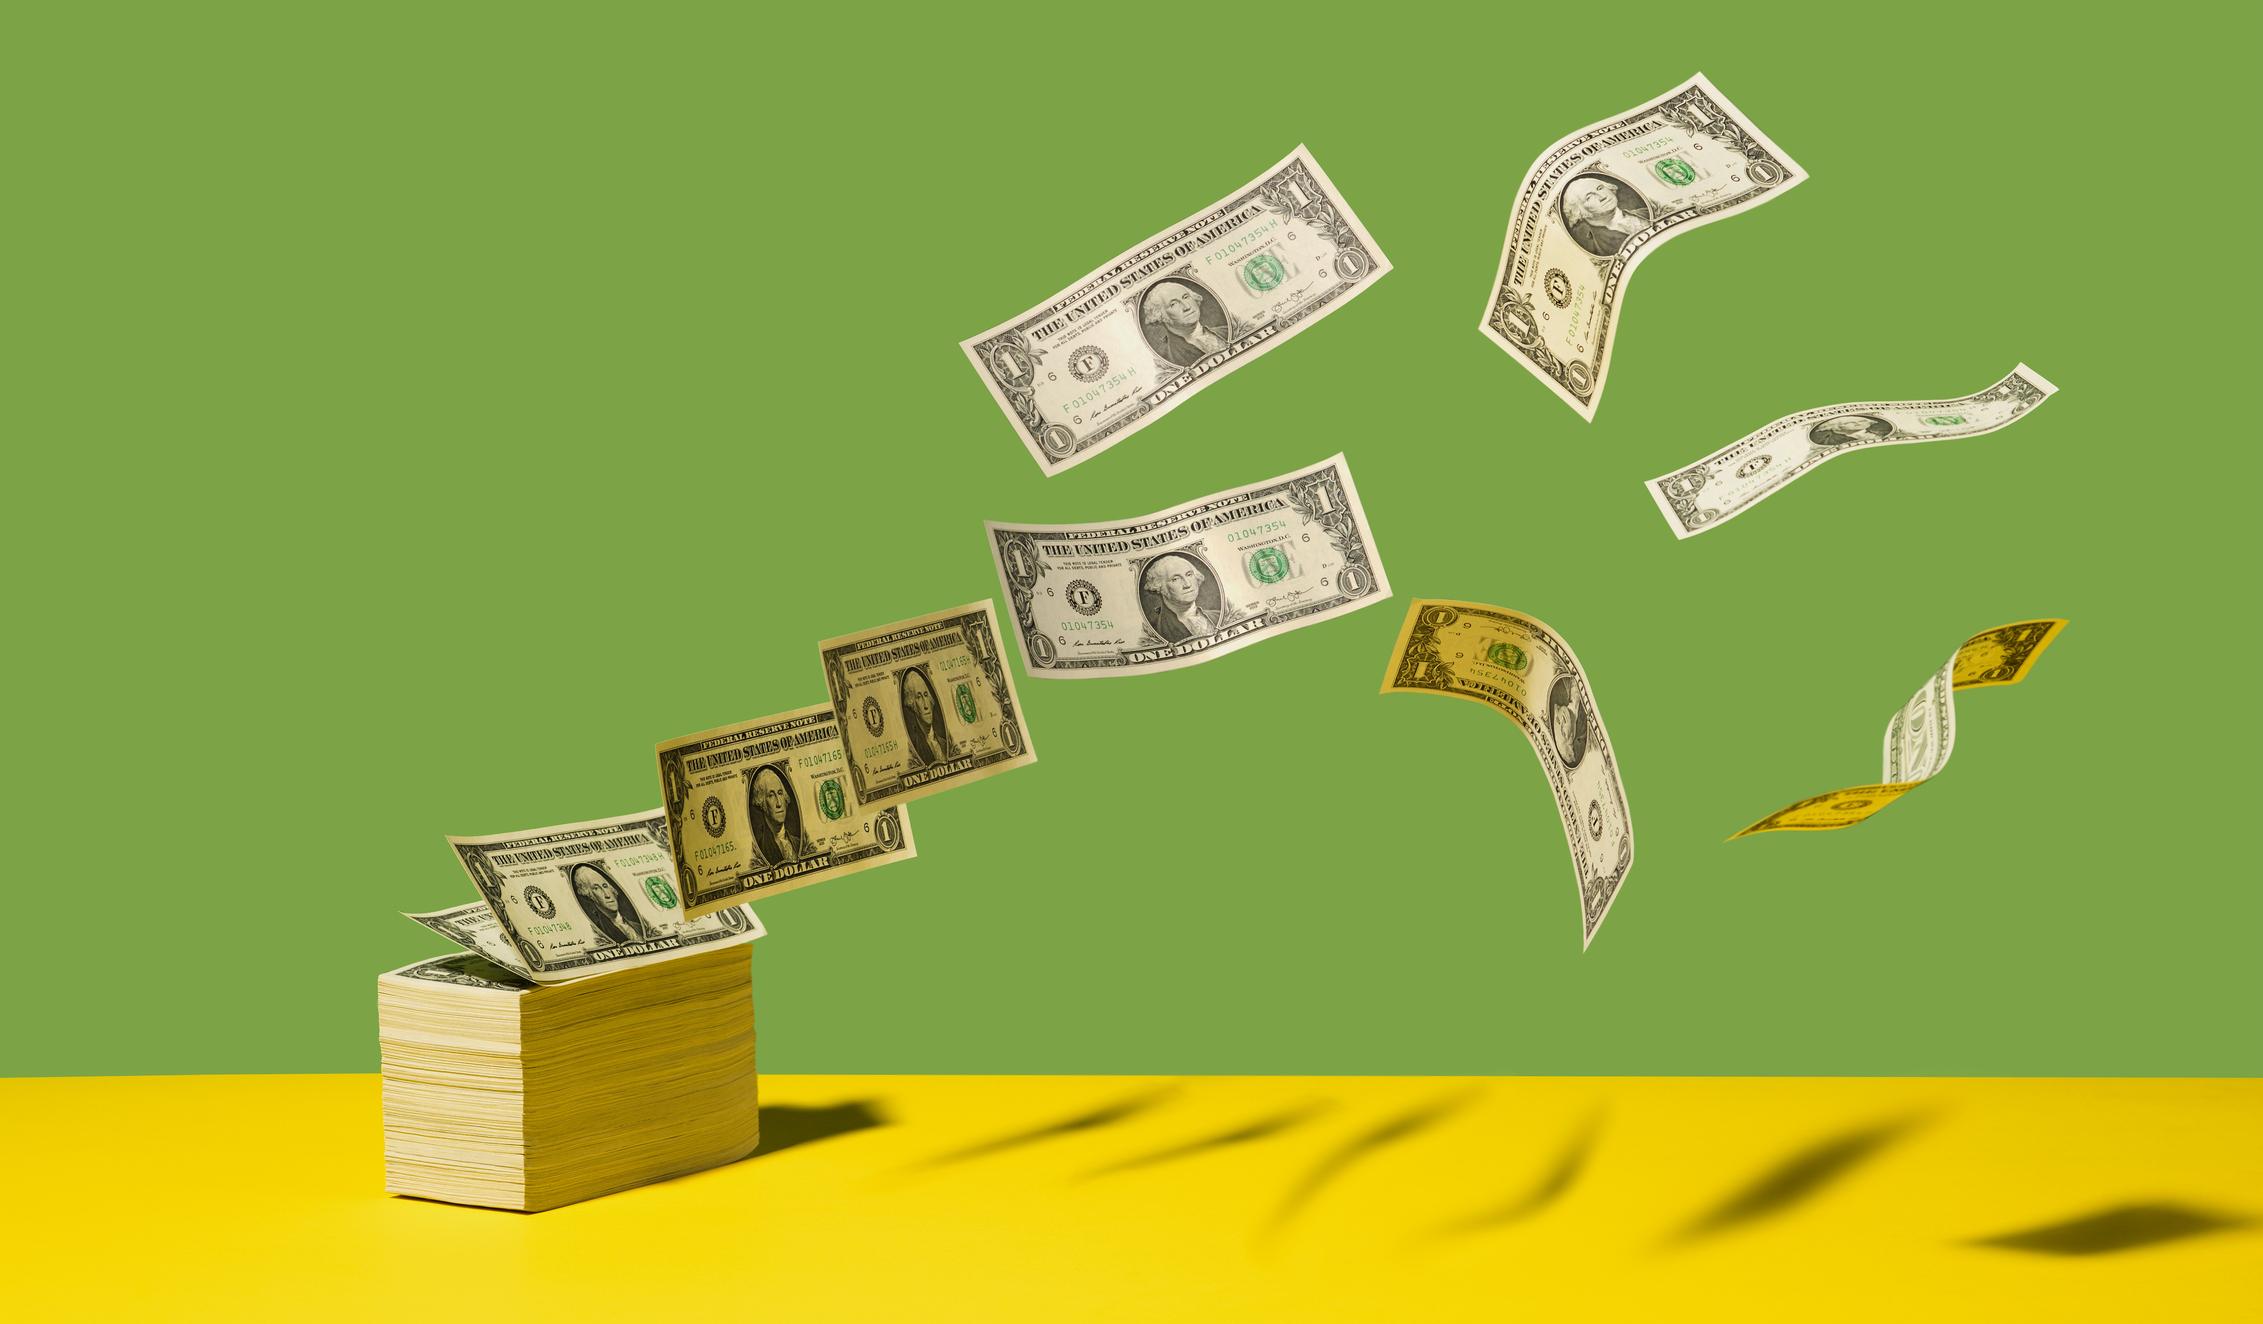 Stack of US $1 bills with bills flying away on yellow shelf, green background.